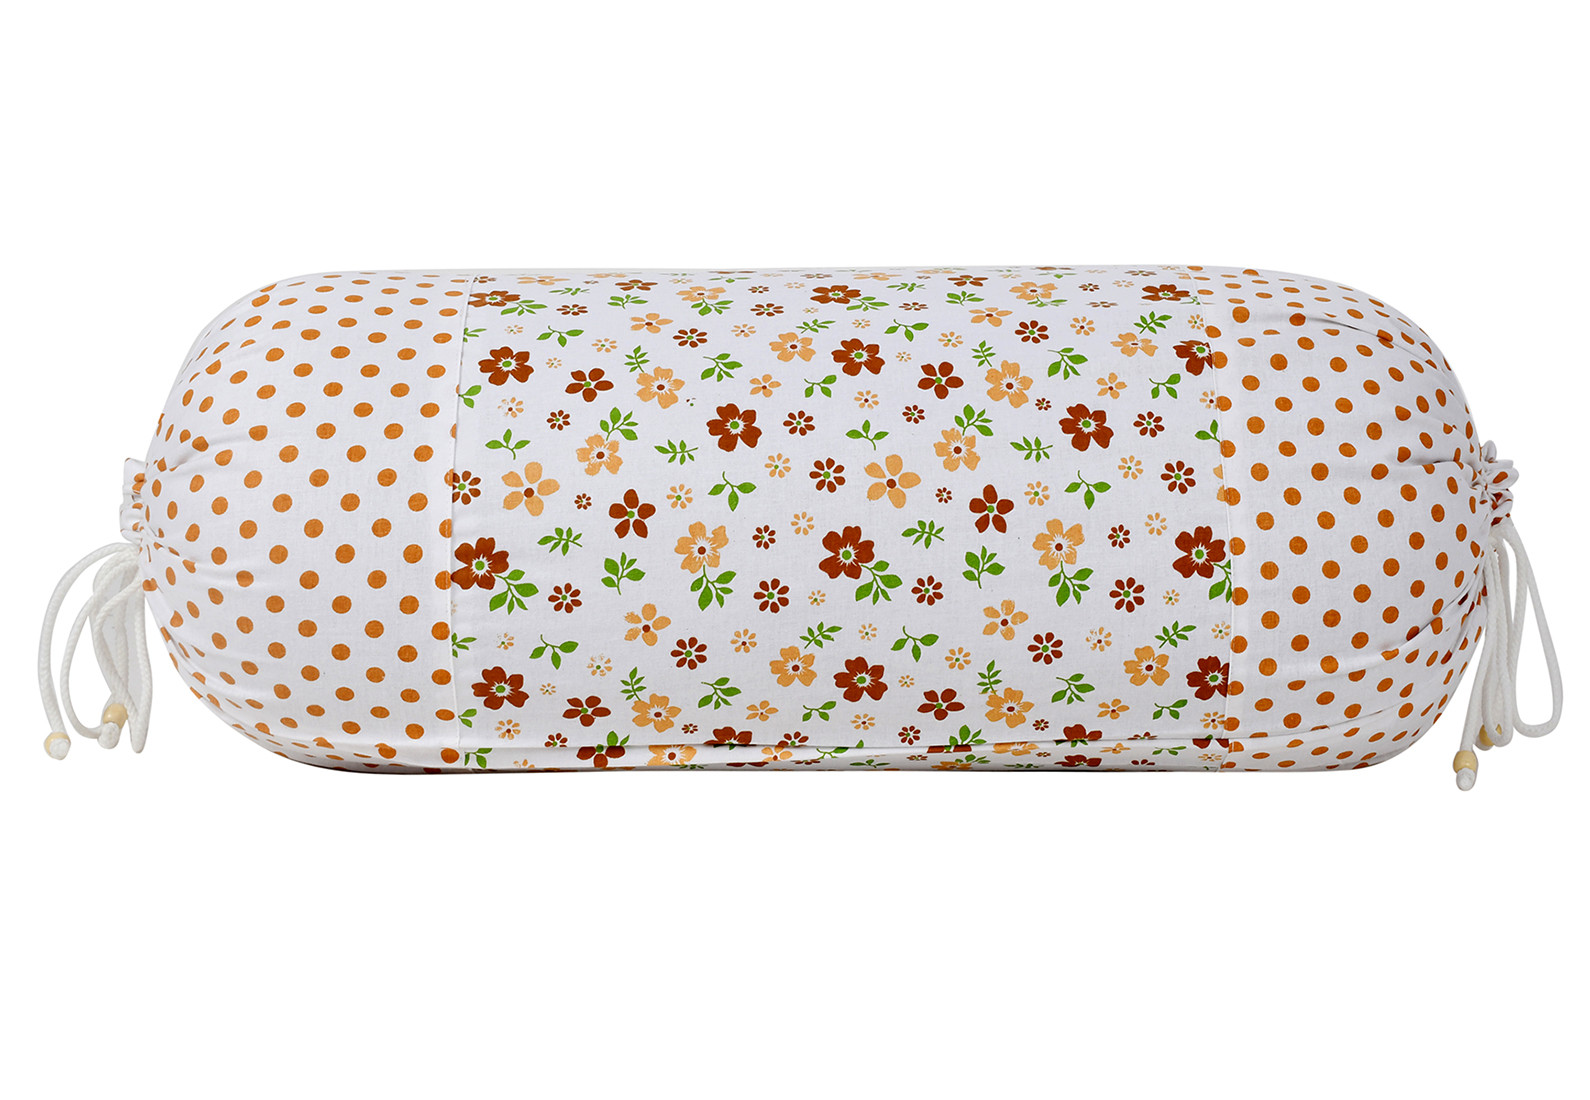 Kuber Industries Flower Printed Cotton Bolster Cover- 16